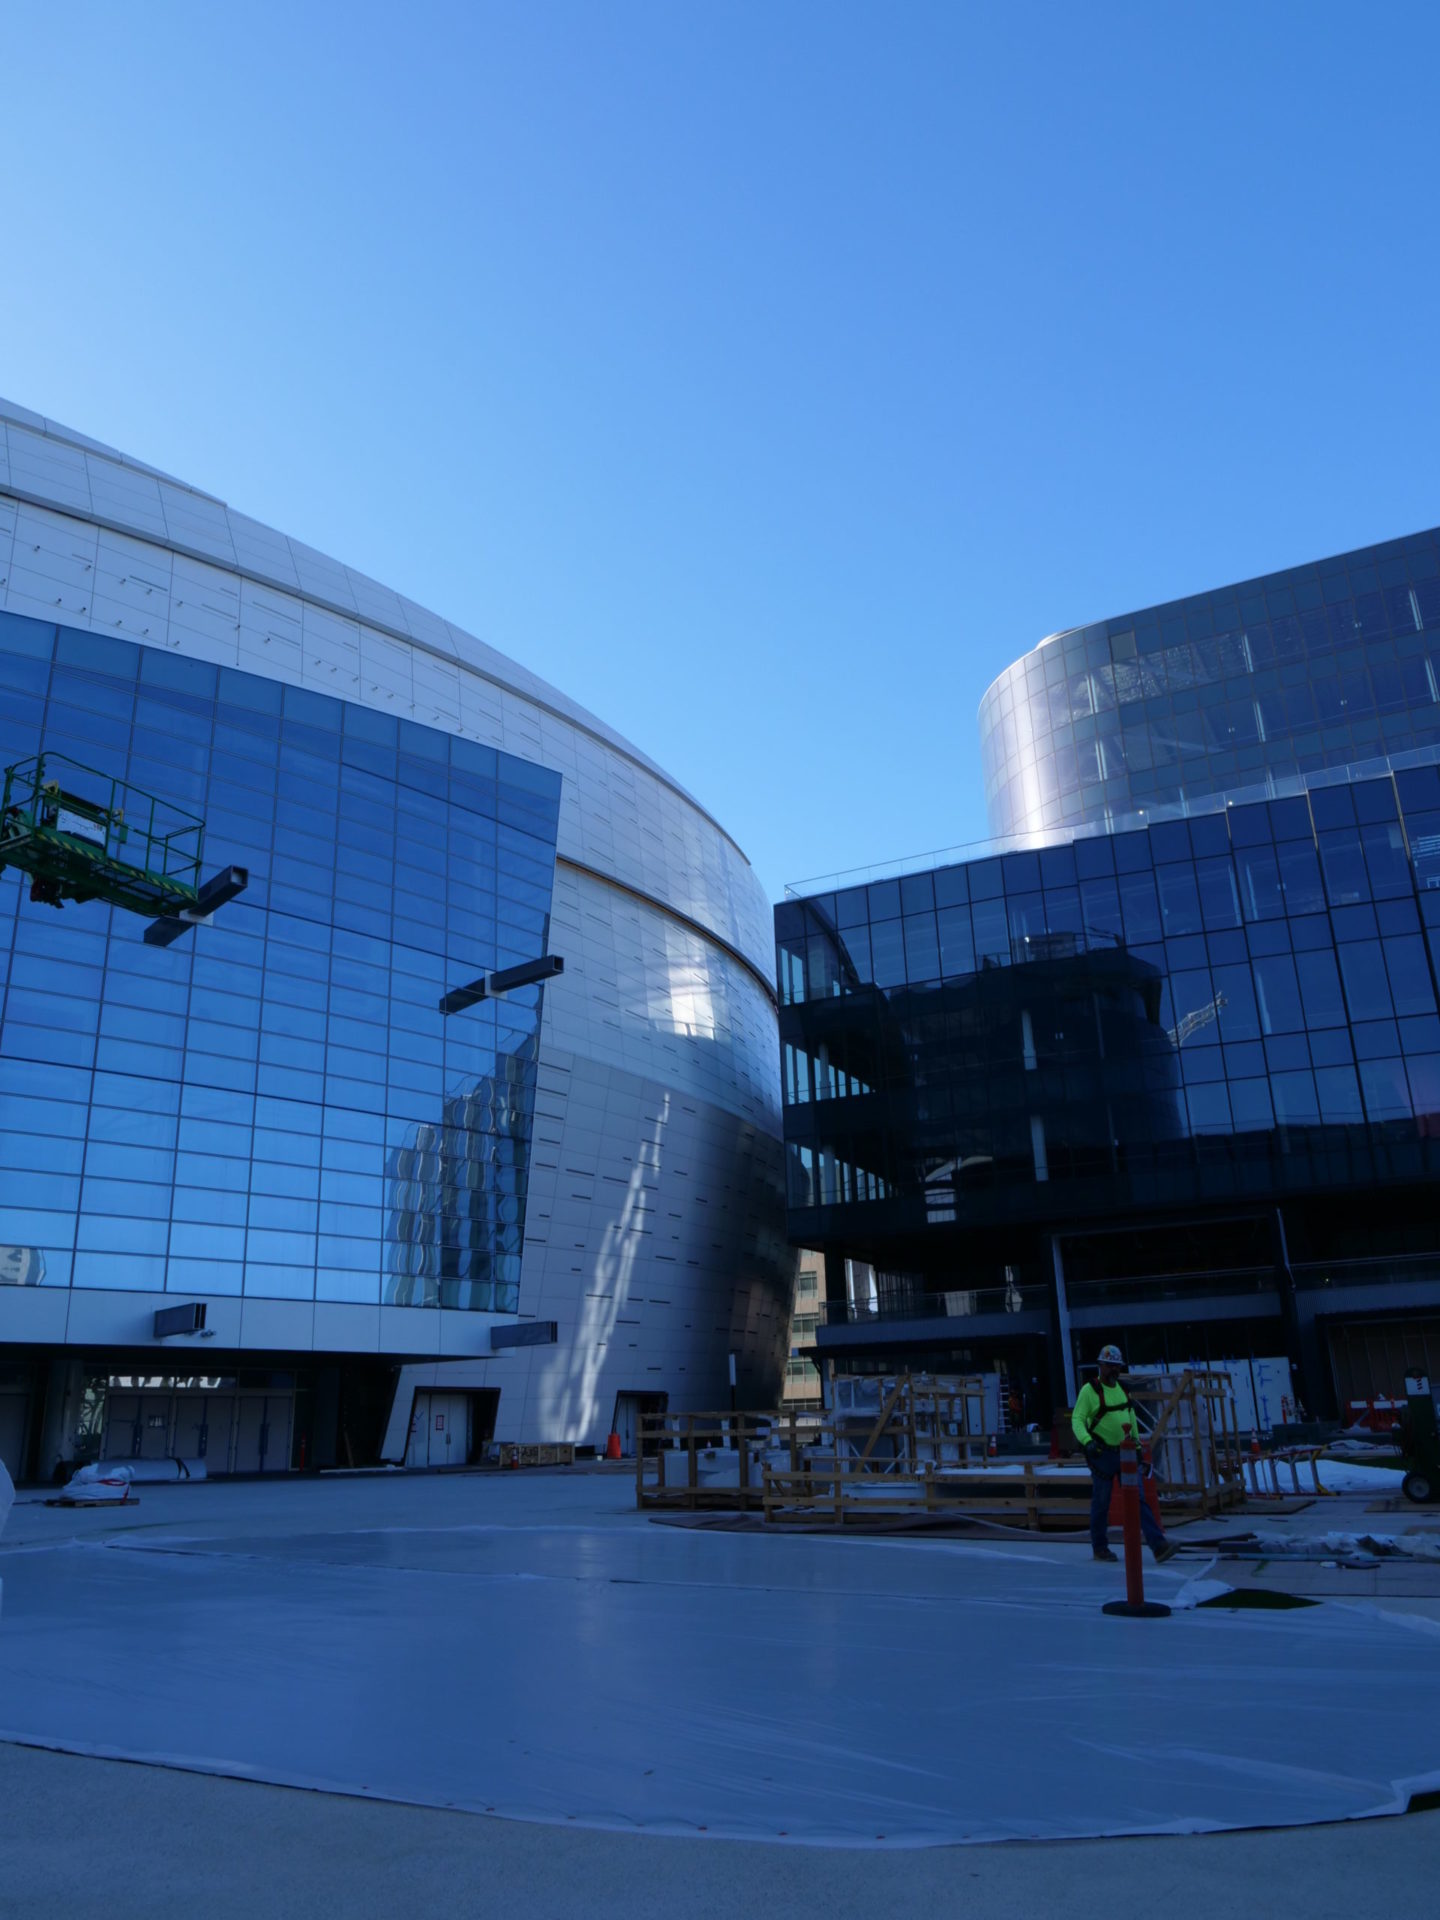 Image from the Gallery: Chase Center – San Francisco, CA